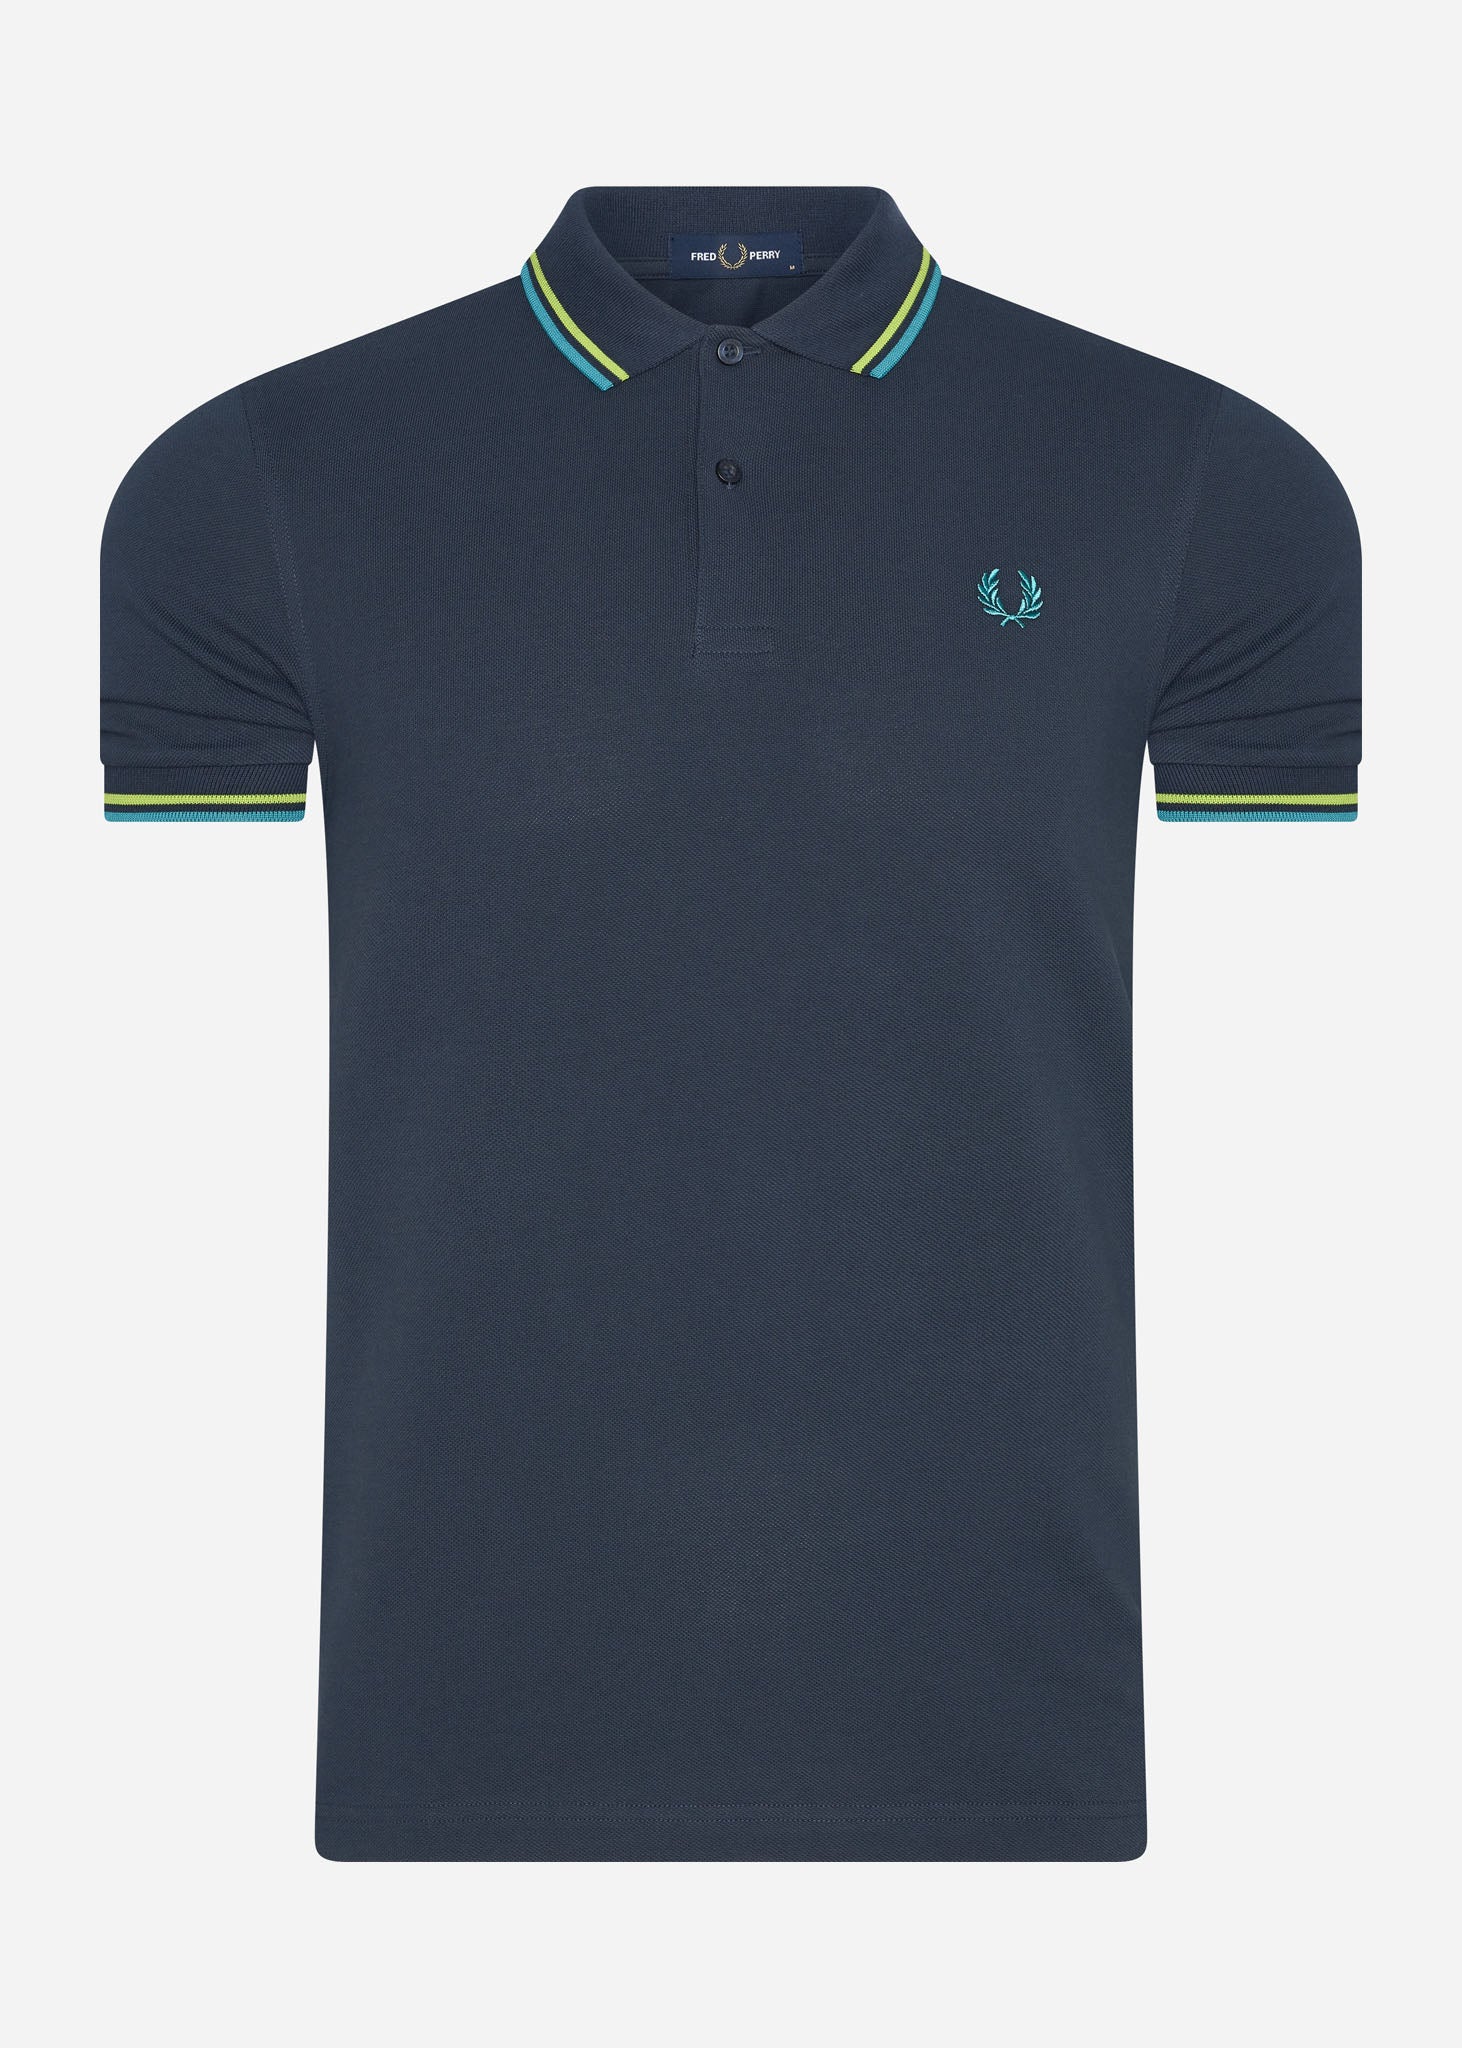 Fred Perry Polo's  Twin tipped fred perry shirt - drkairf lim sgrn 